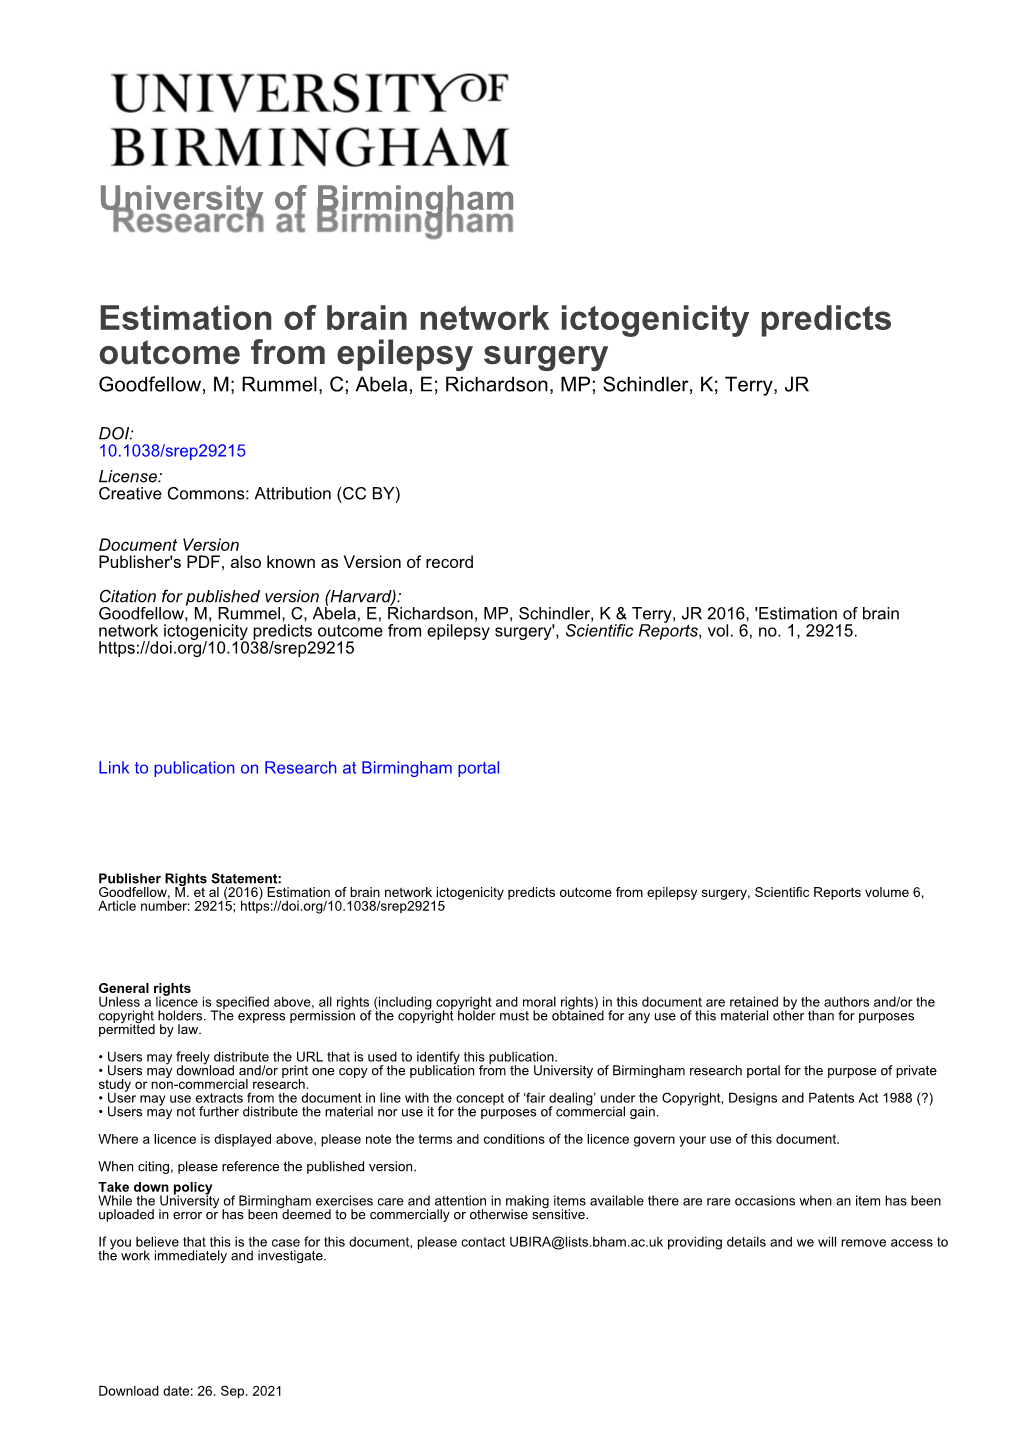 Estimation of Brain Network Ictogenicity Predicts Outcome from Epilepsy Surgery Goodfellow, M; Rummel, C; Abela, E; Richardson, MP; Schindler, K; Terry, JR